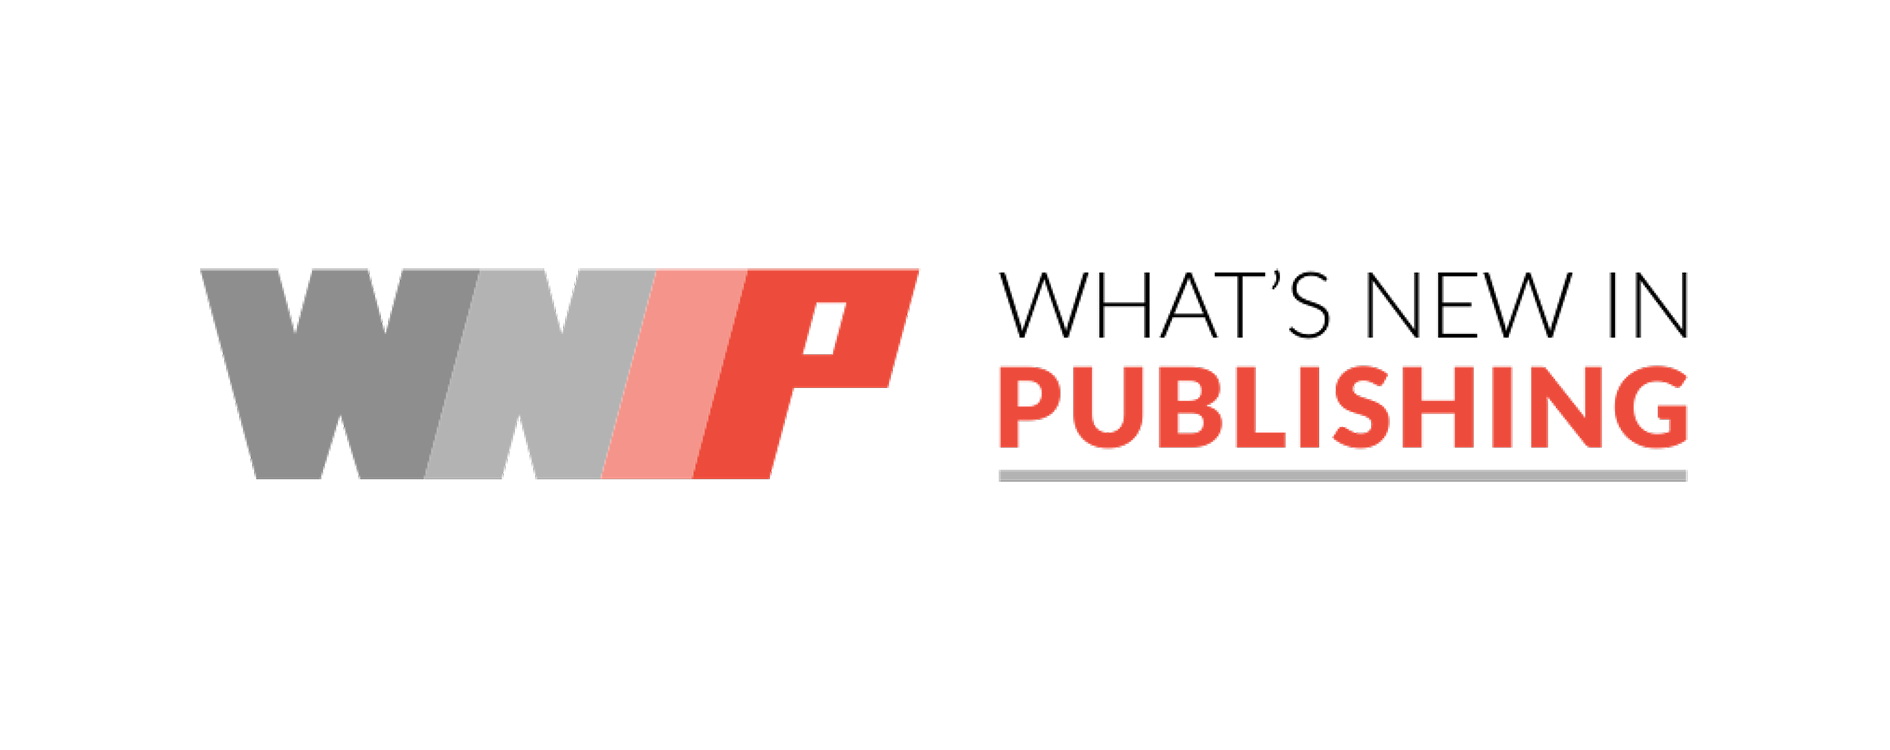 33Across What's New In Publishing Logo